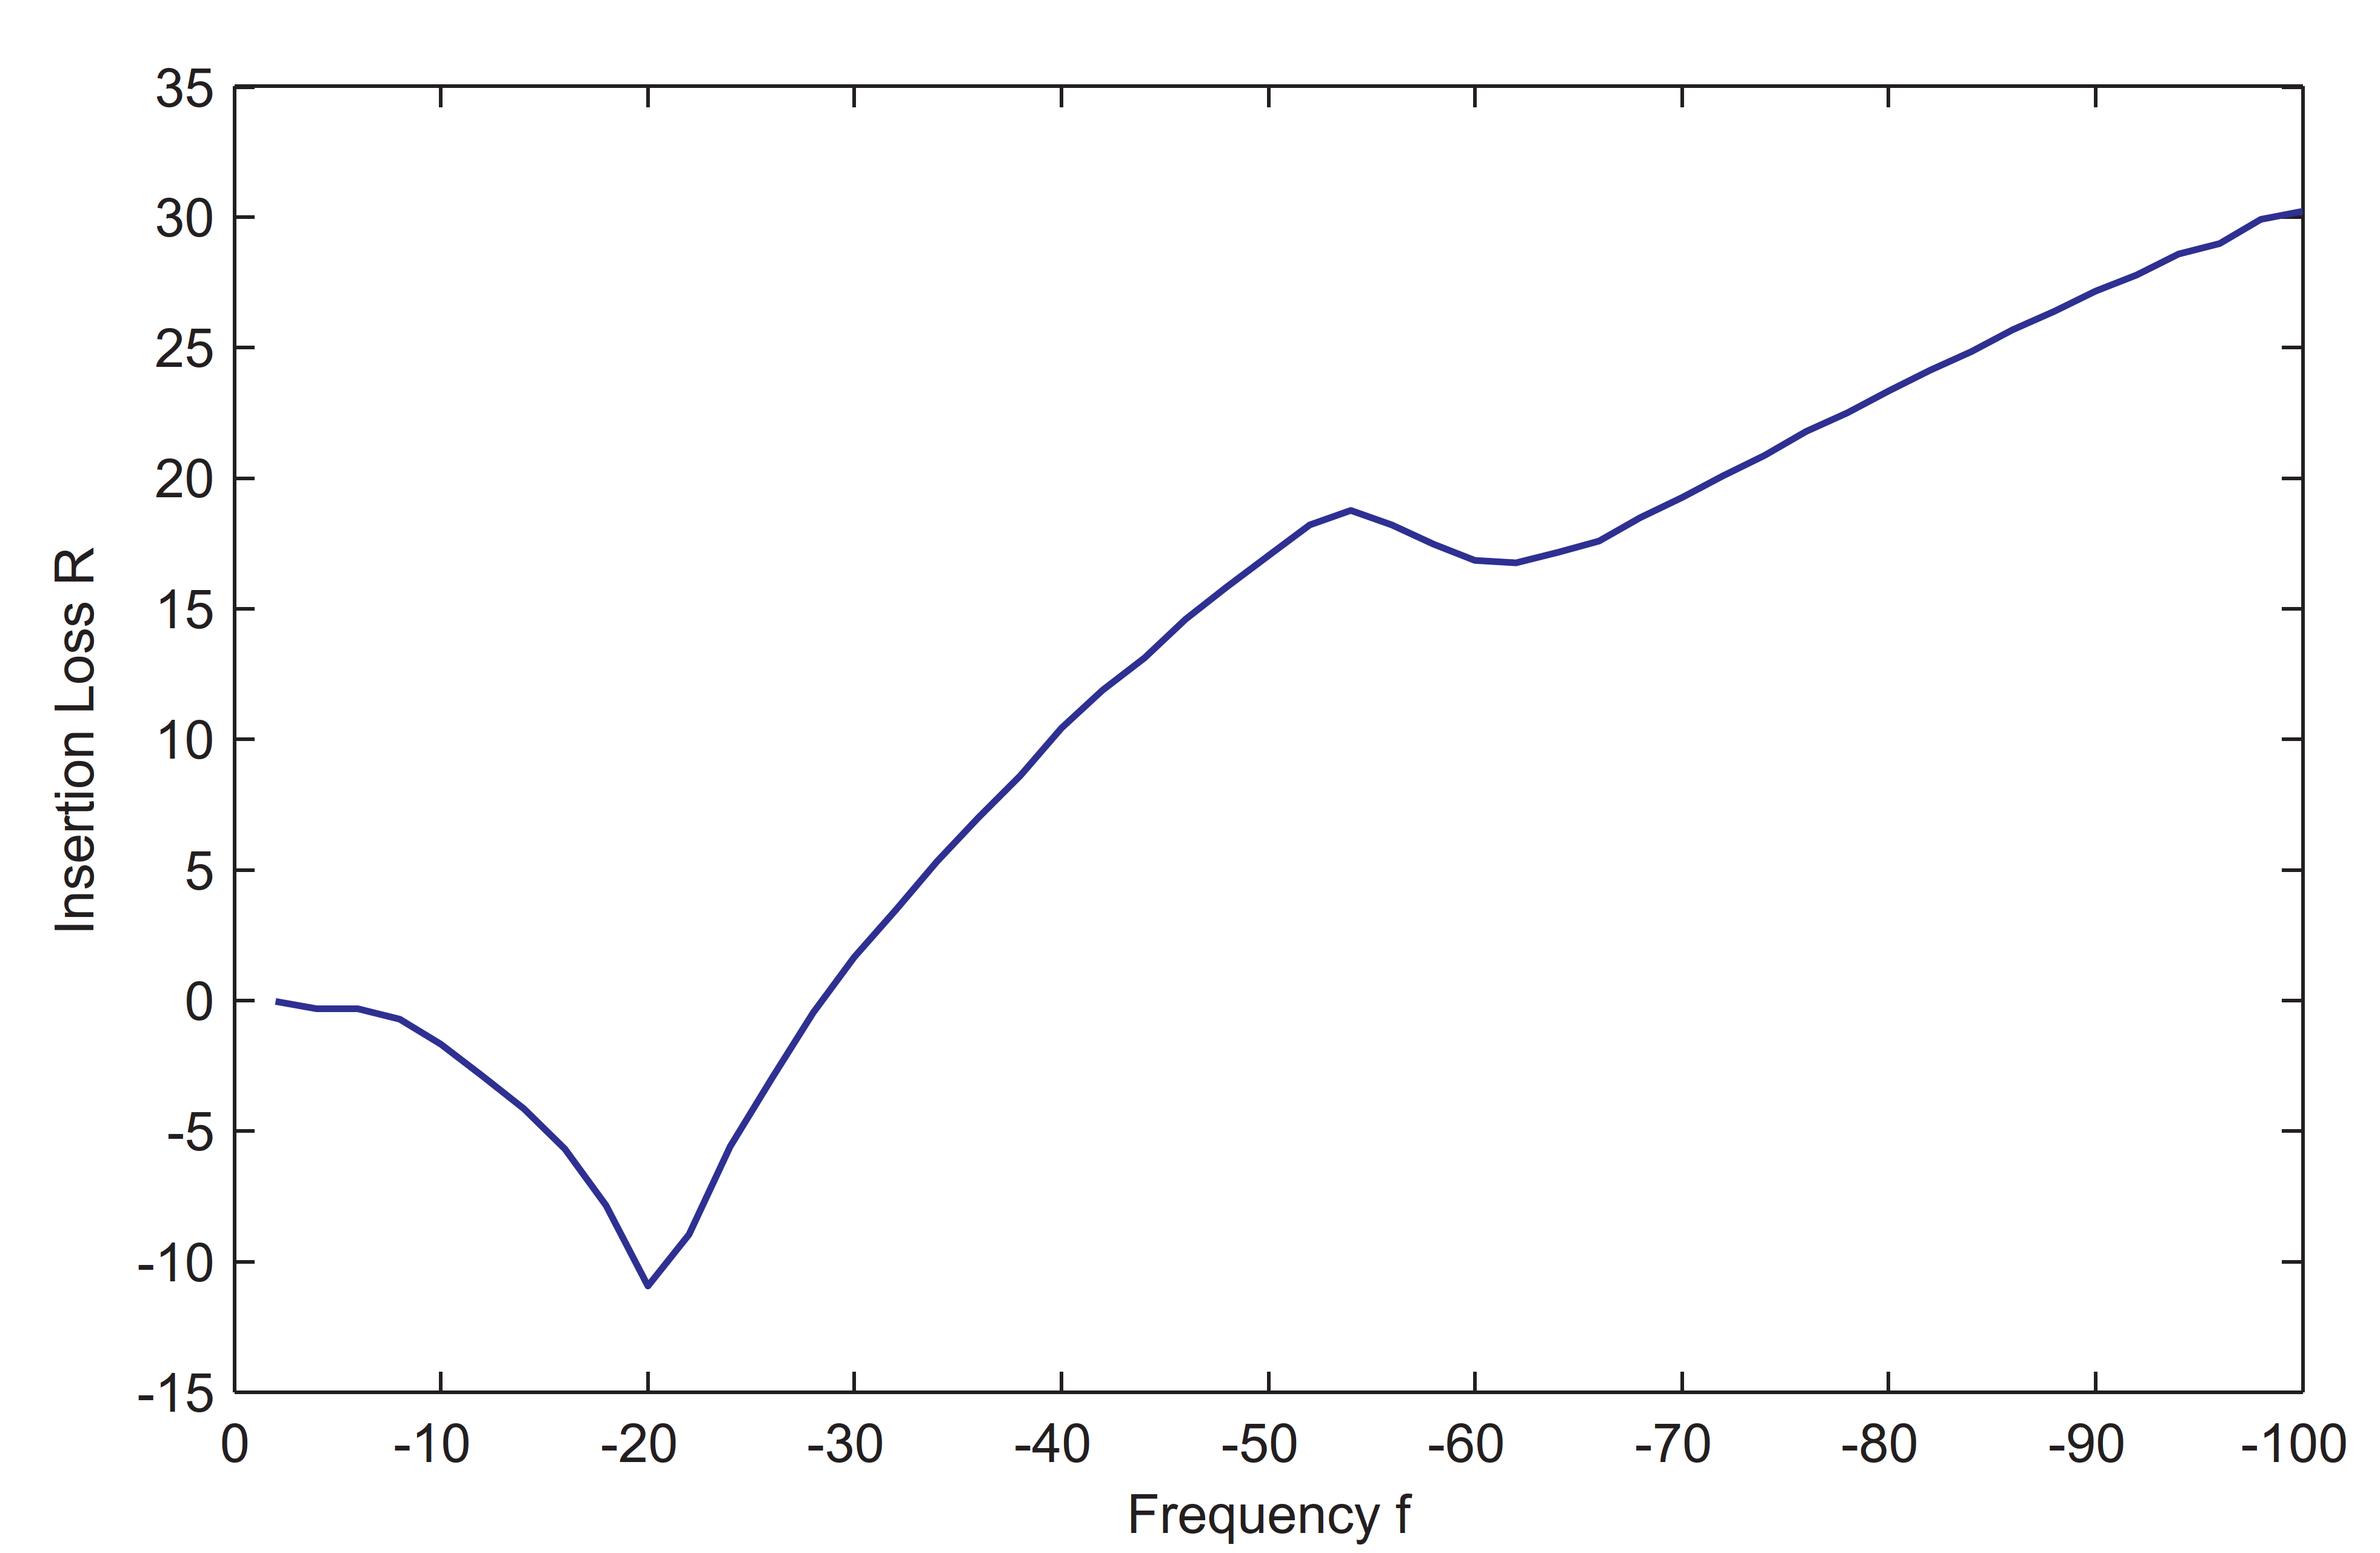 insertion Loss R in dB due to a harmonic load within the tunnel evaluated at the center of the halfspace surface